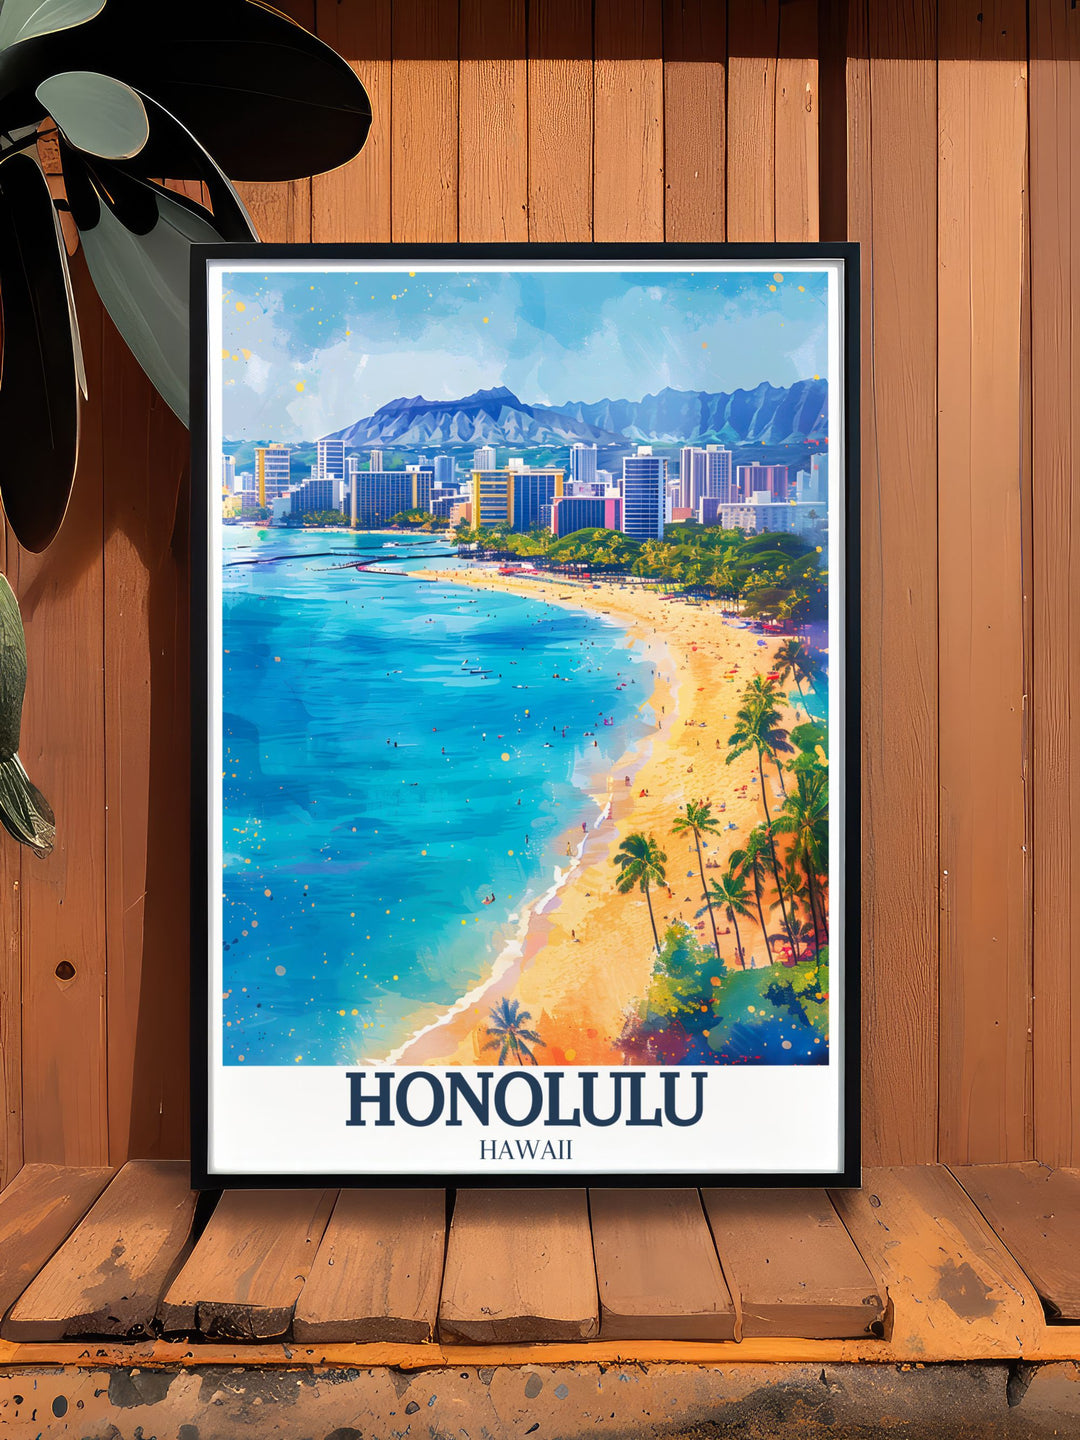 Vintage poster of Waikiki Beach, featuring the timeless beauty and vibrant energy of Honolulu, Hawaii. This piece captures the beachs lively atmosphere and serene surroundings, evoking the charm of island culture and tropical paradise.